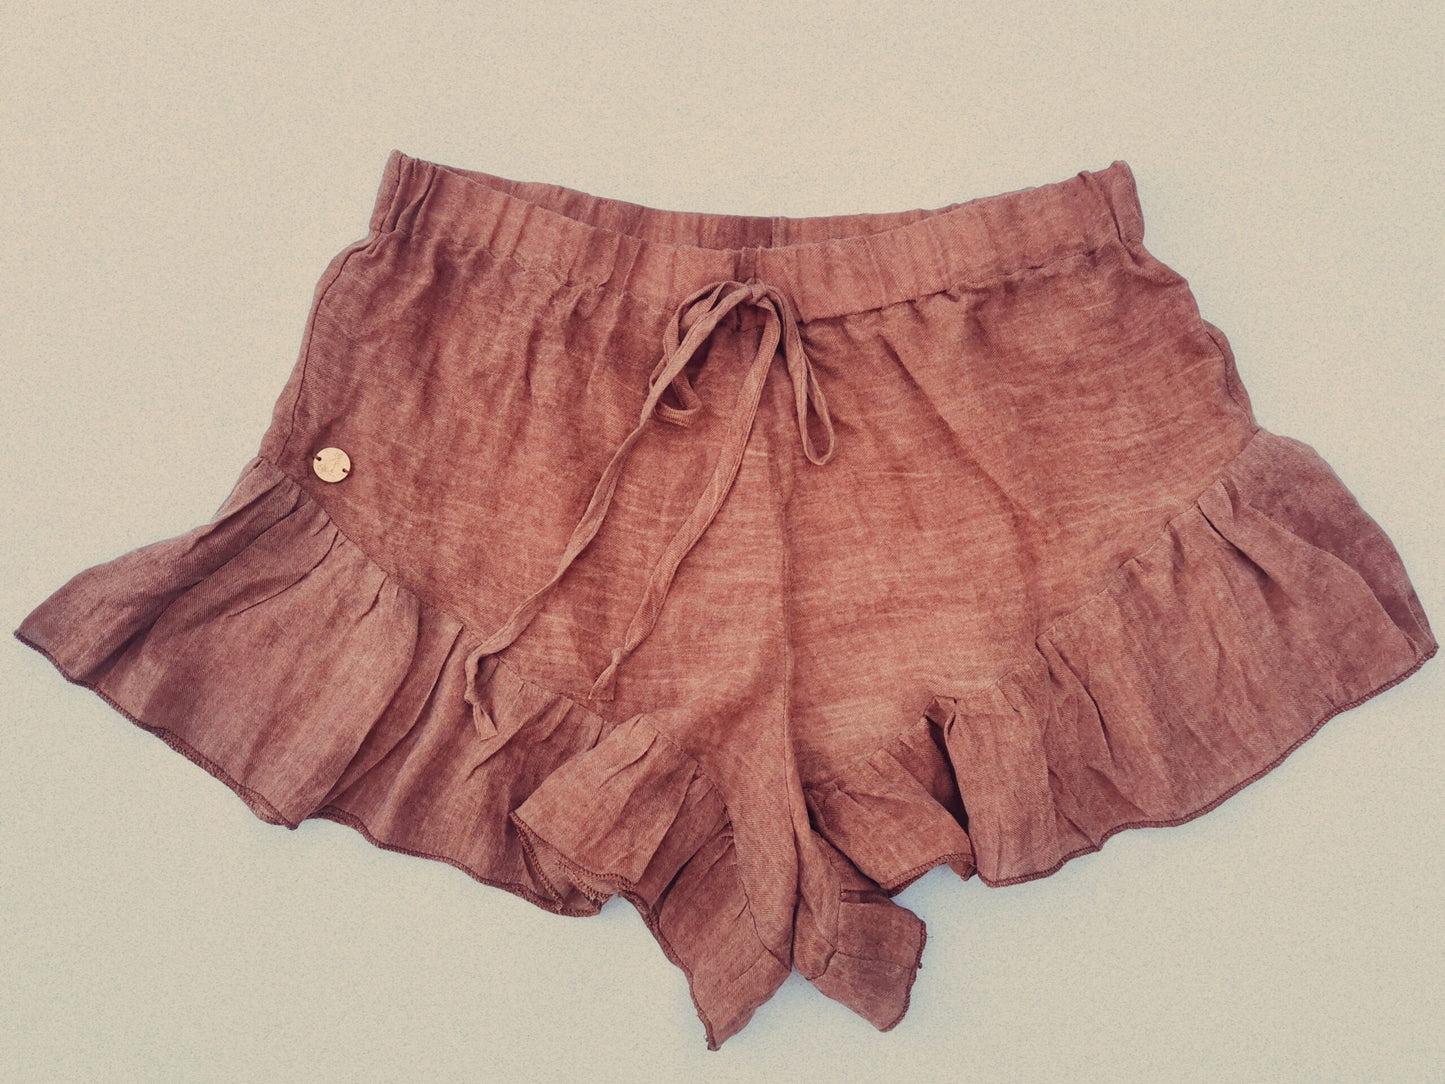 A close up image of luxurious rust coloured linen loungewear shorts designed and manufactured in South Africa